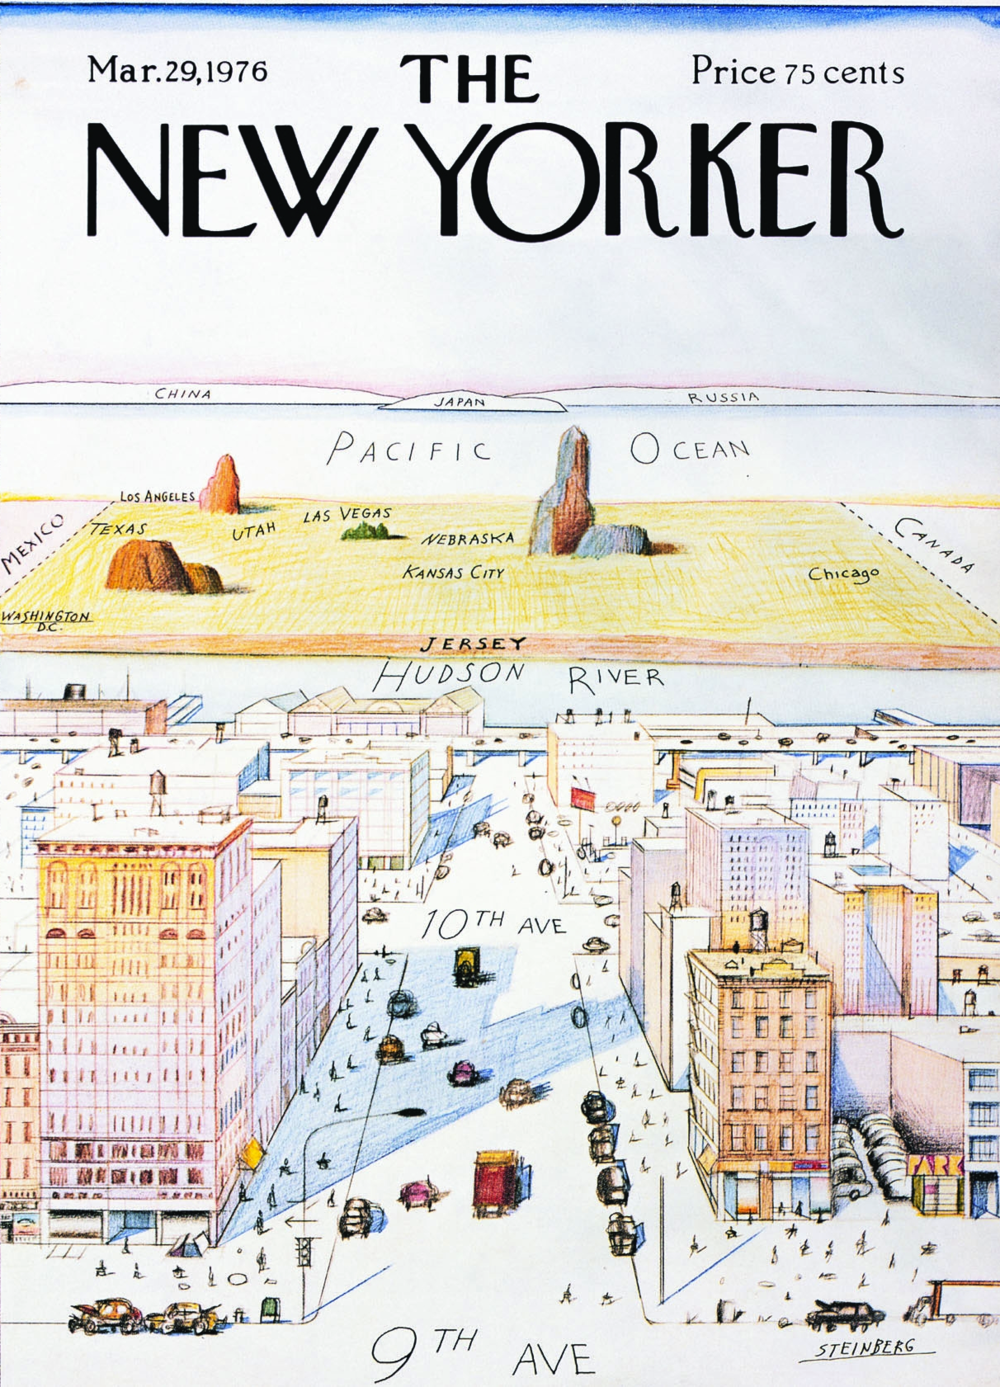 Image of New Yorker's magazine cover - view of the world from 9th avenue